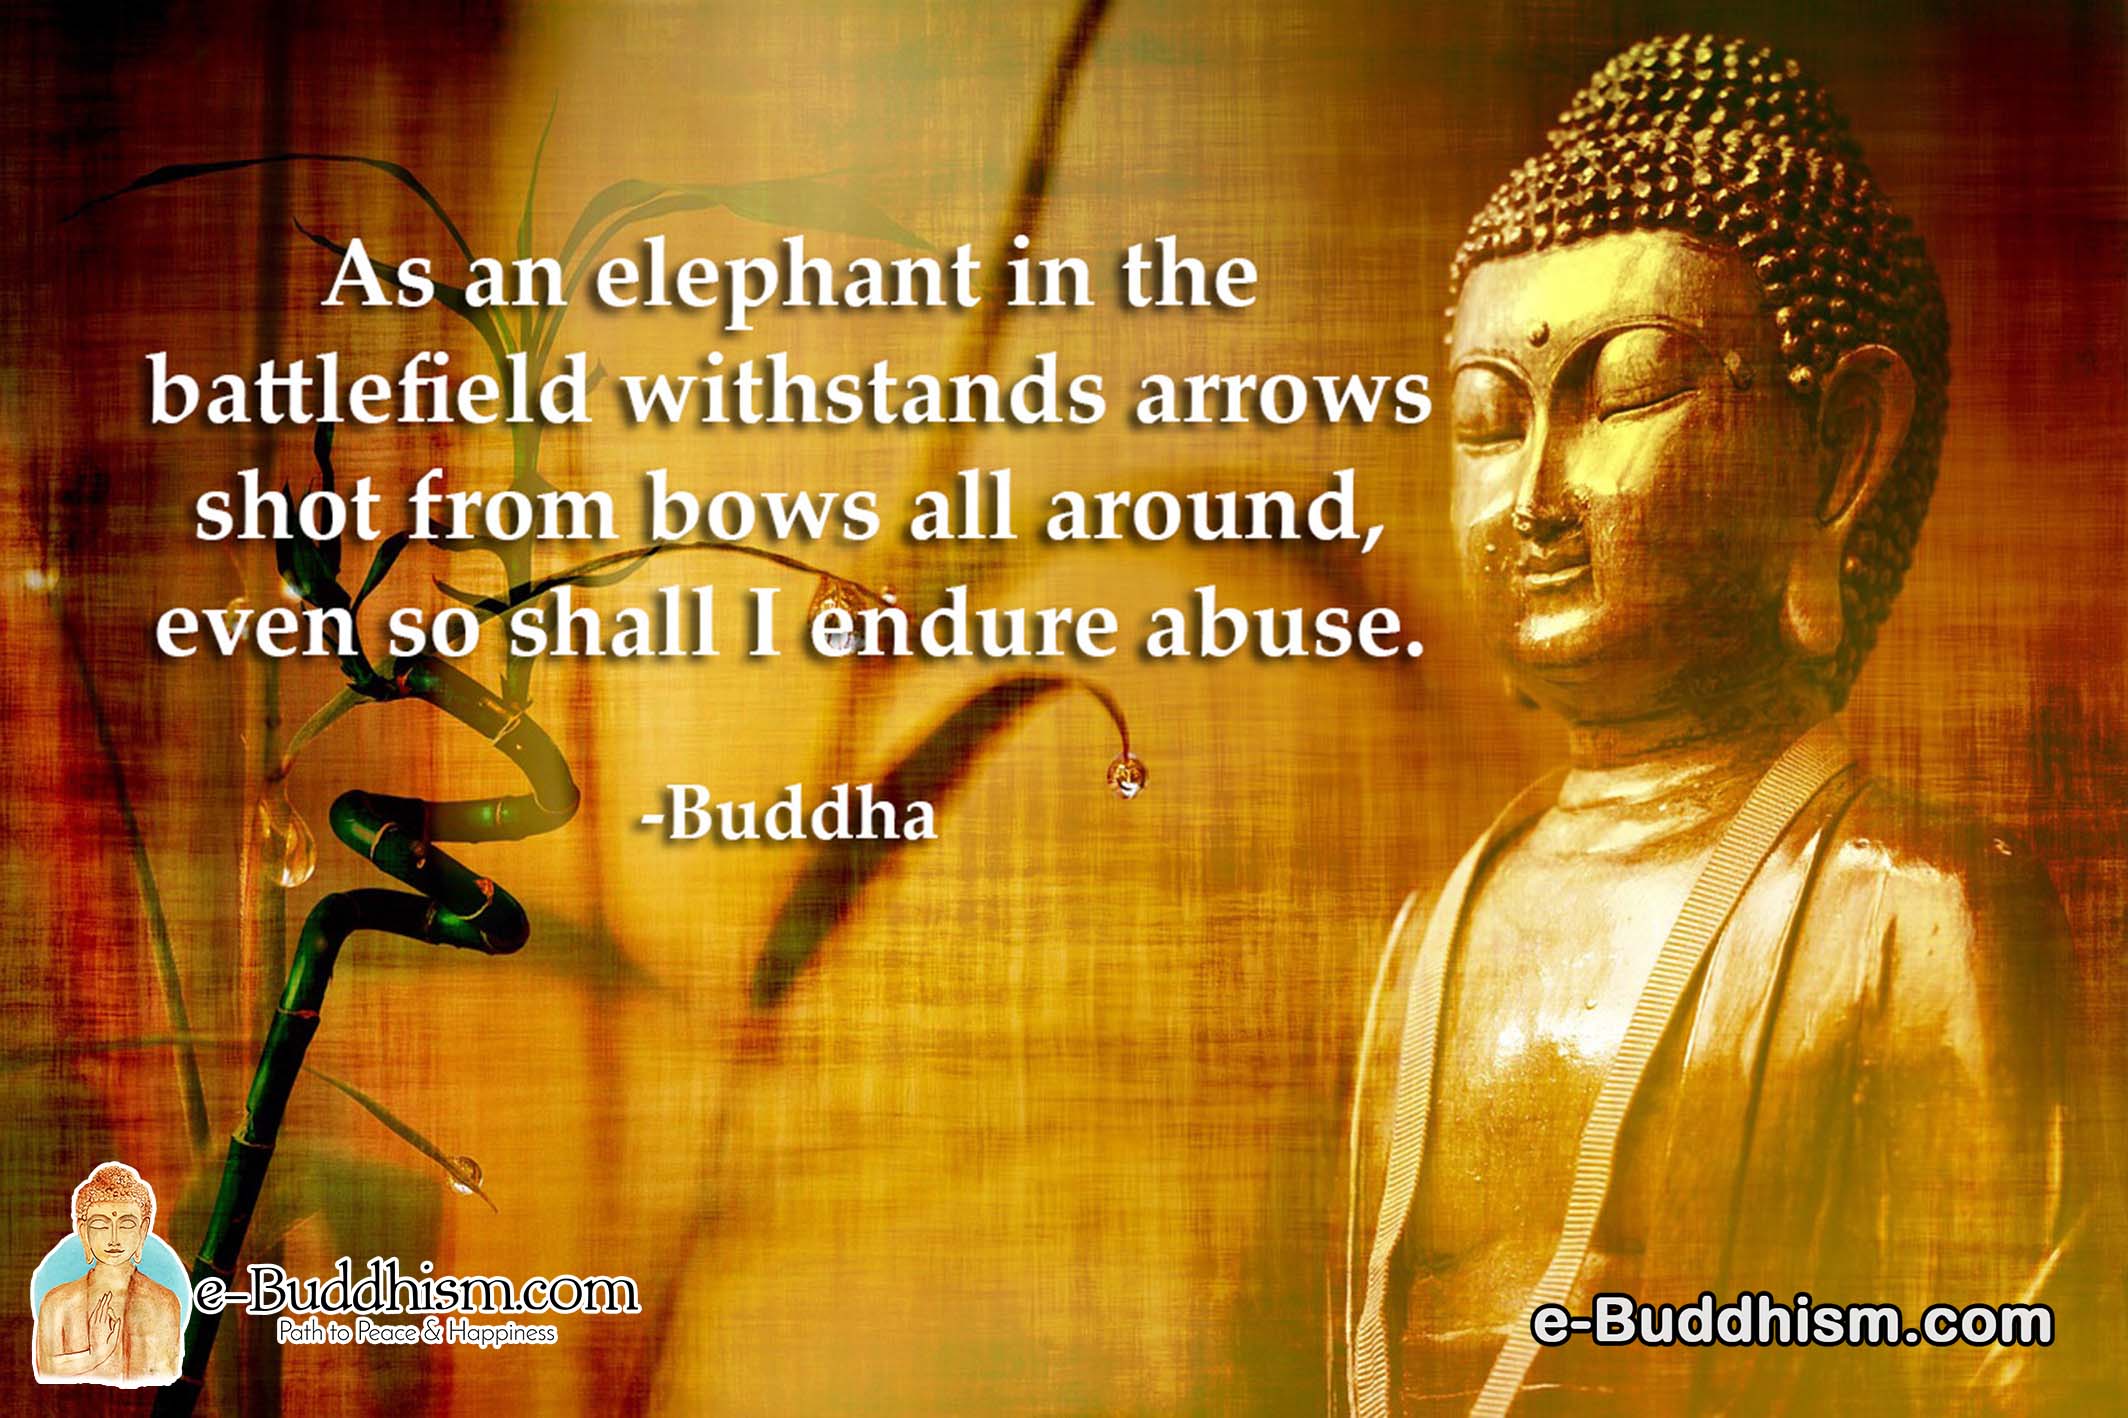 As an elephant on the battlefield withstands arrows shot from bows all around, even so, shall I endure abuse? -Buddha